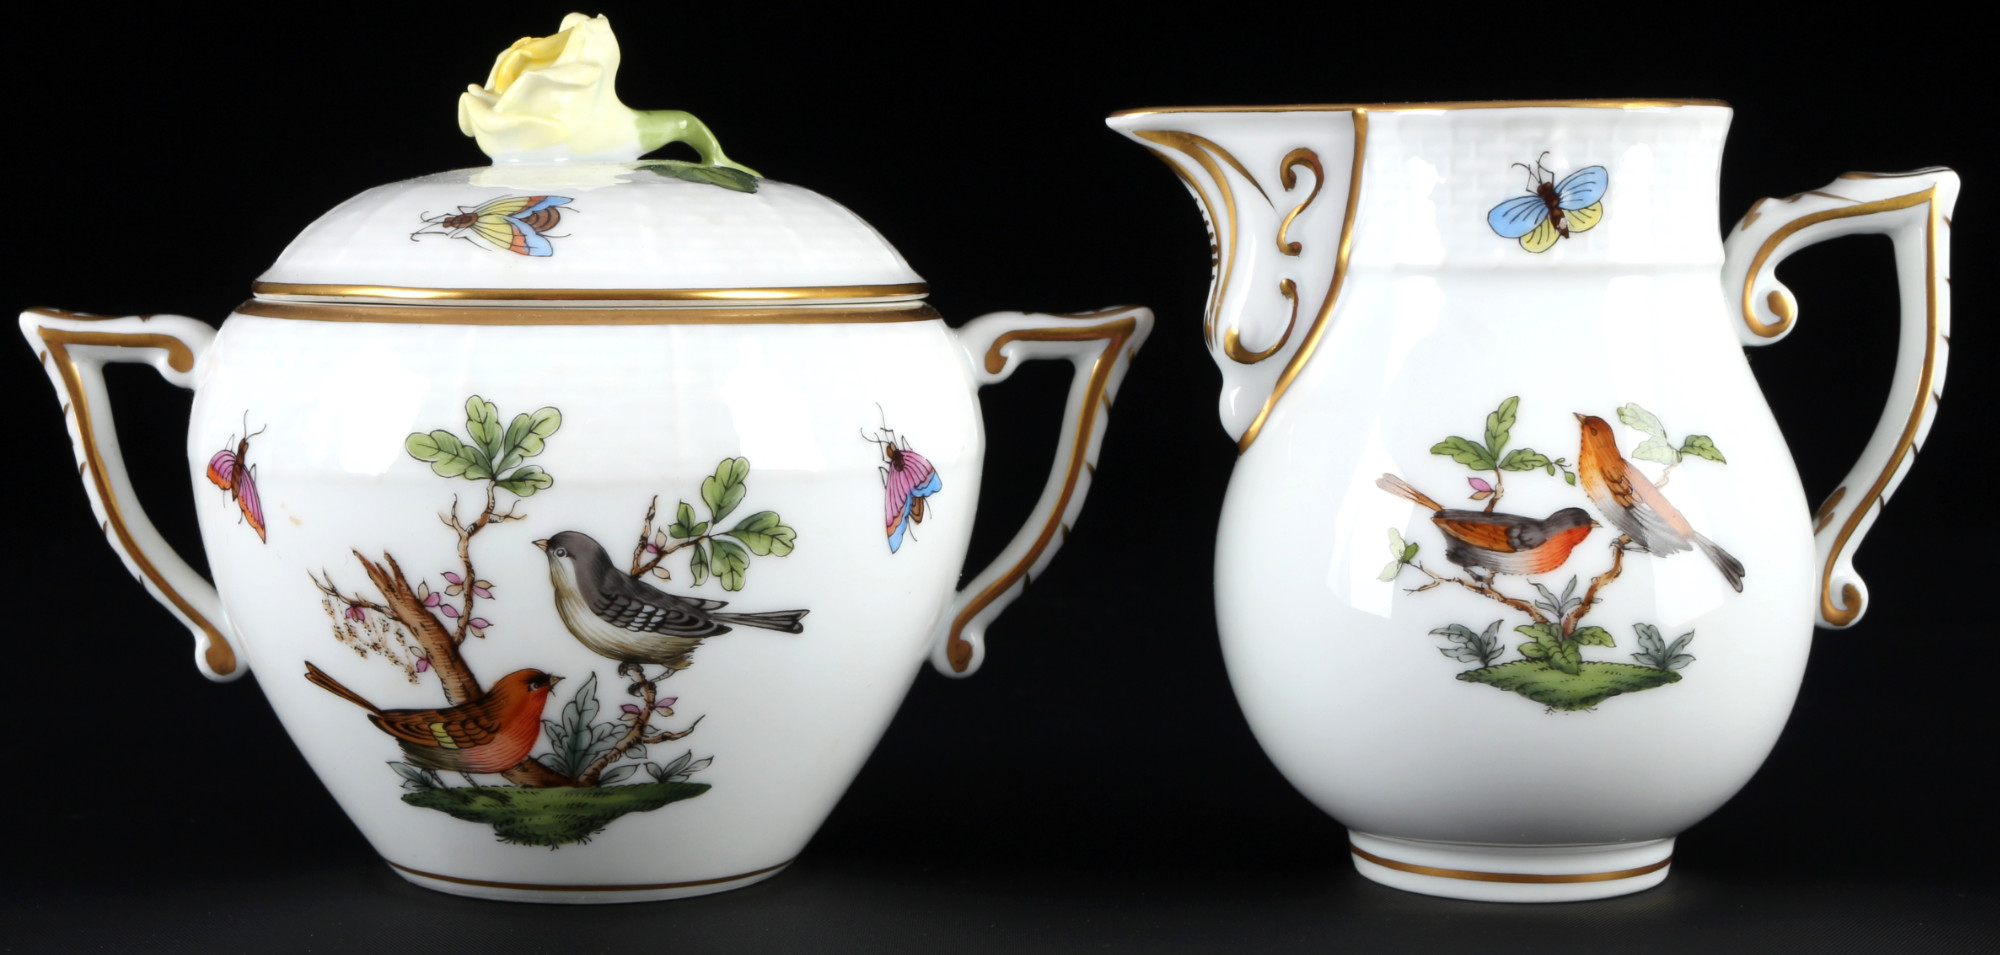 Herend Rothschild tea service for 6 persons, Teeservice für 6 Personen, - Image 5 of 10